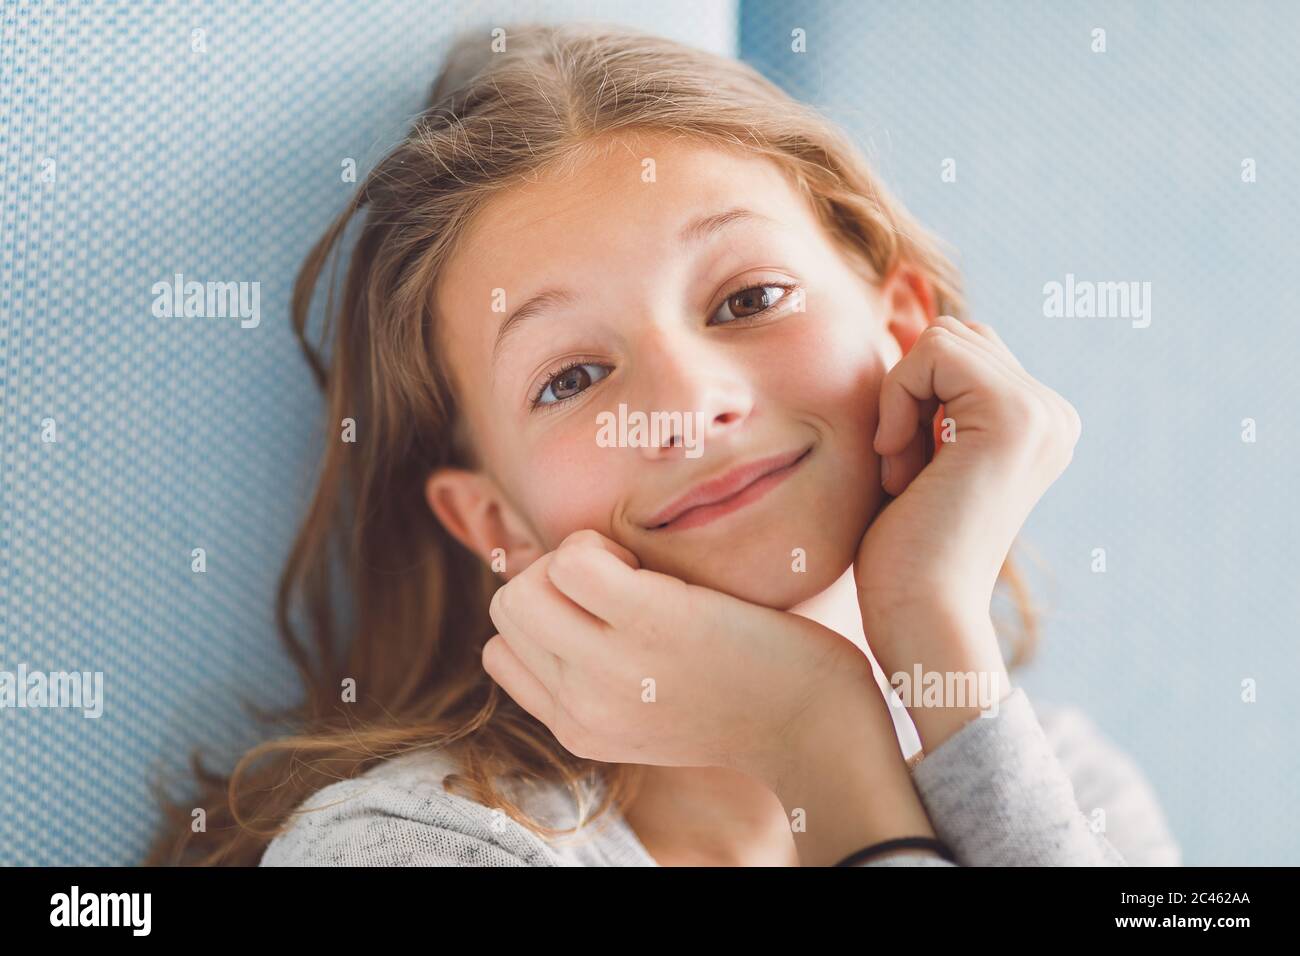 Light and airy portrait of young girl smiling at camera in front of blue background Stock Photo